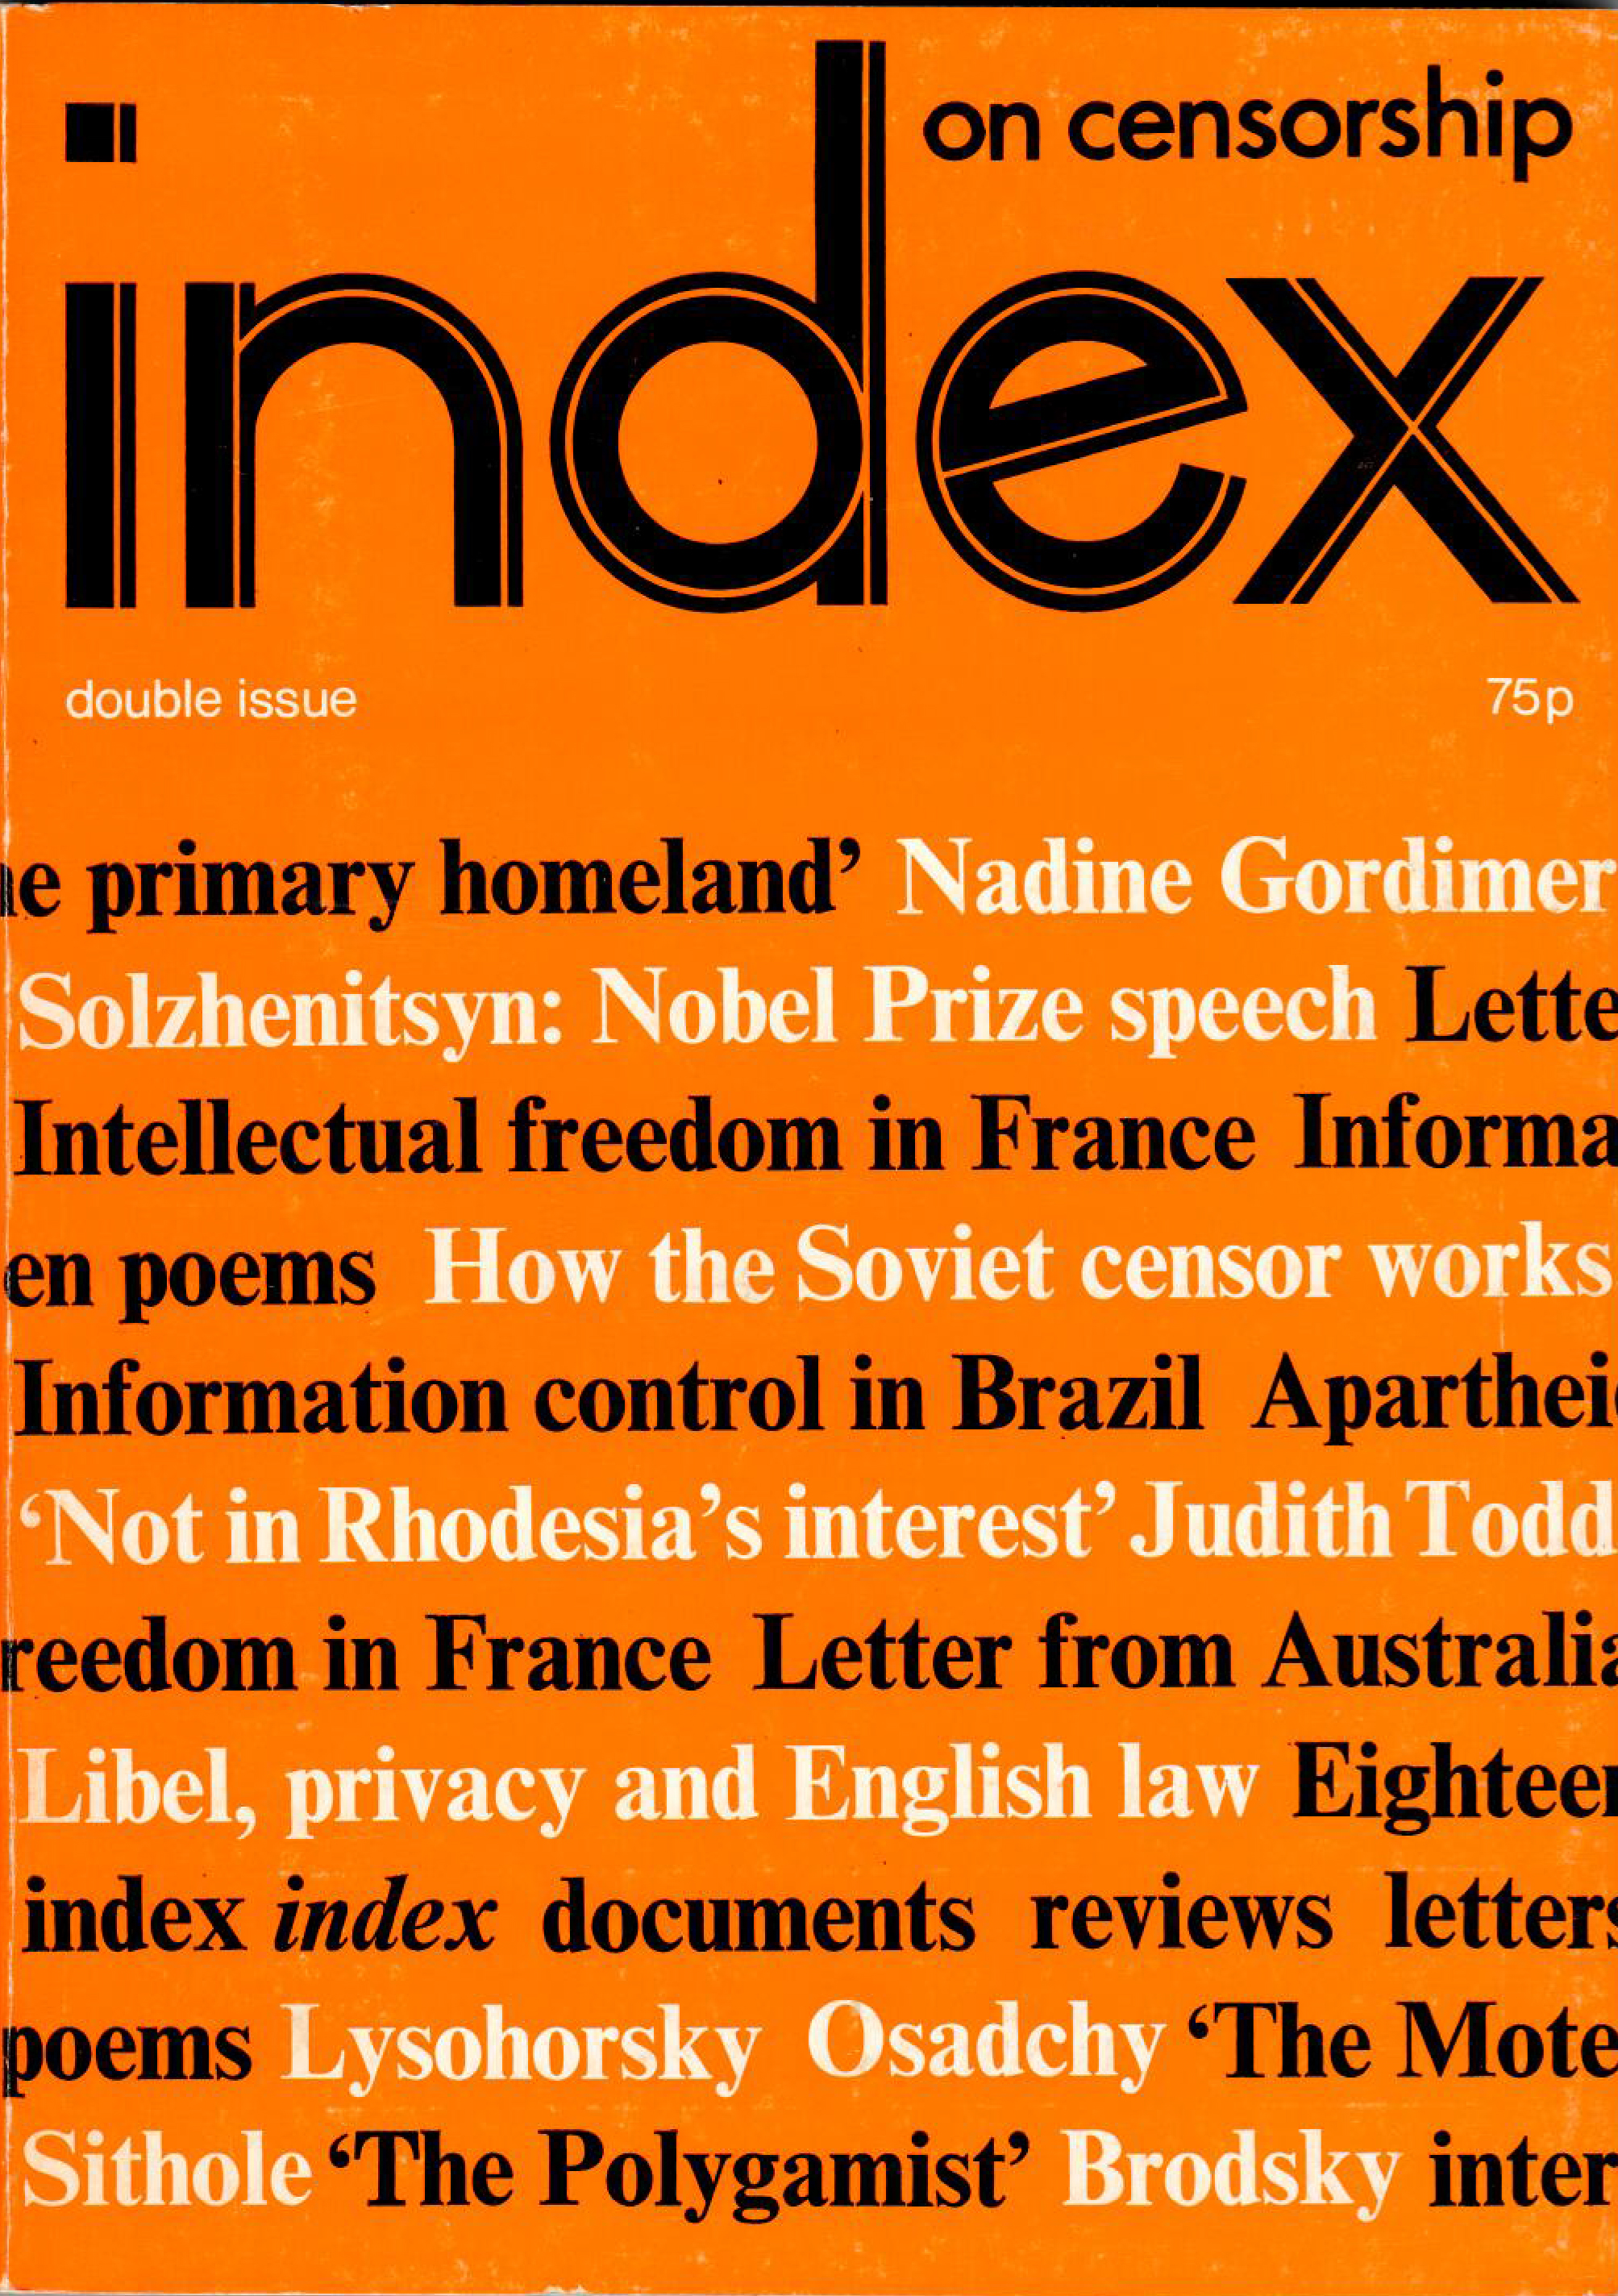 The primary homeland the Autumn/Winter 1972 issue of Index on Censorship magazine